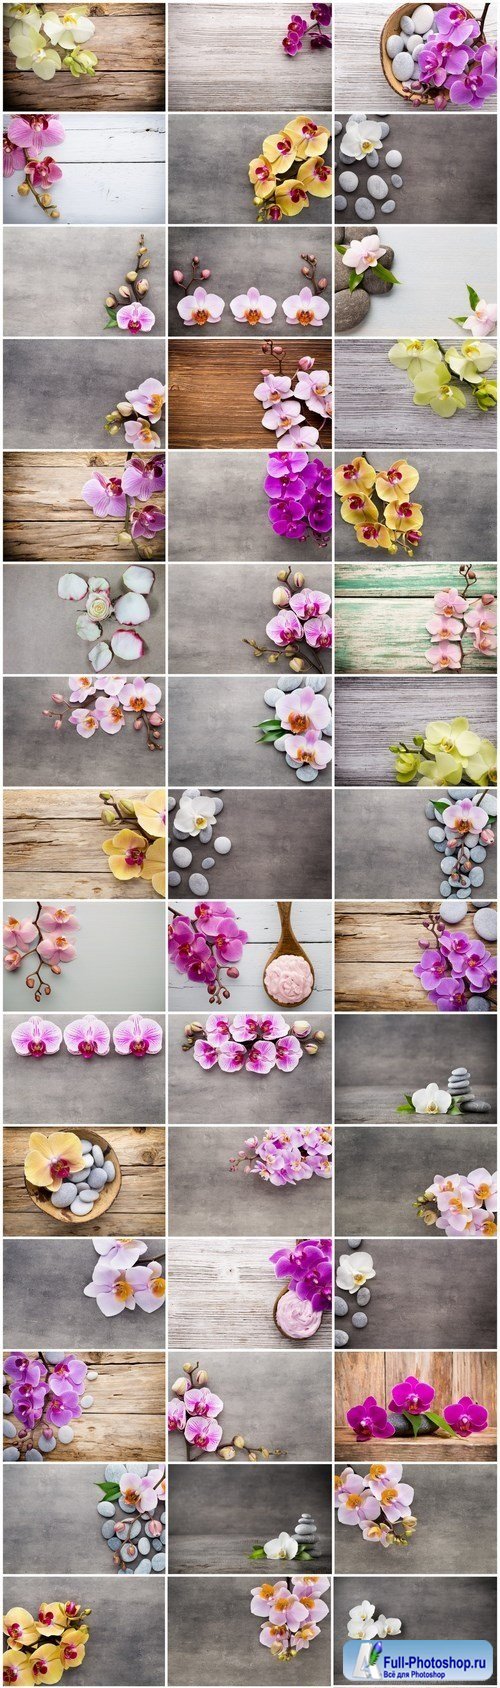 Orchid & SPA Backgrounds - Set of 50xUHQ JPEG Professional Stock Images